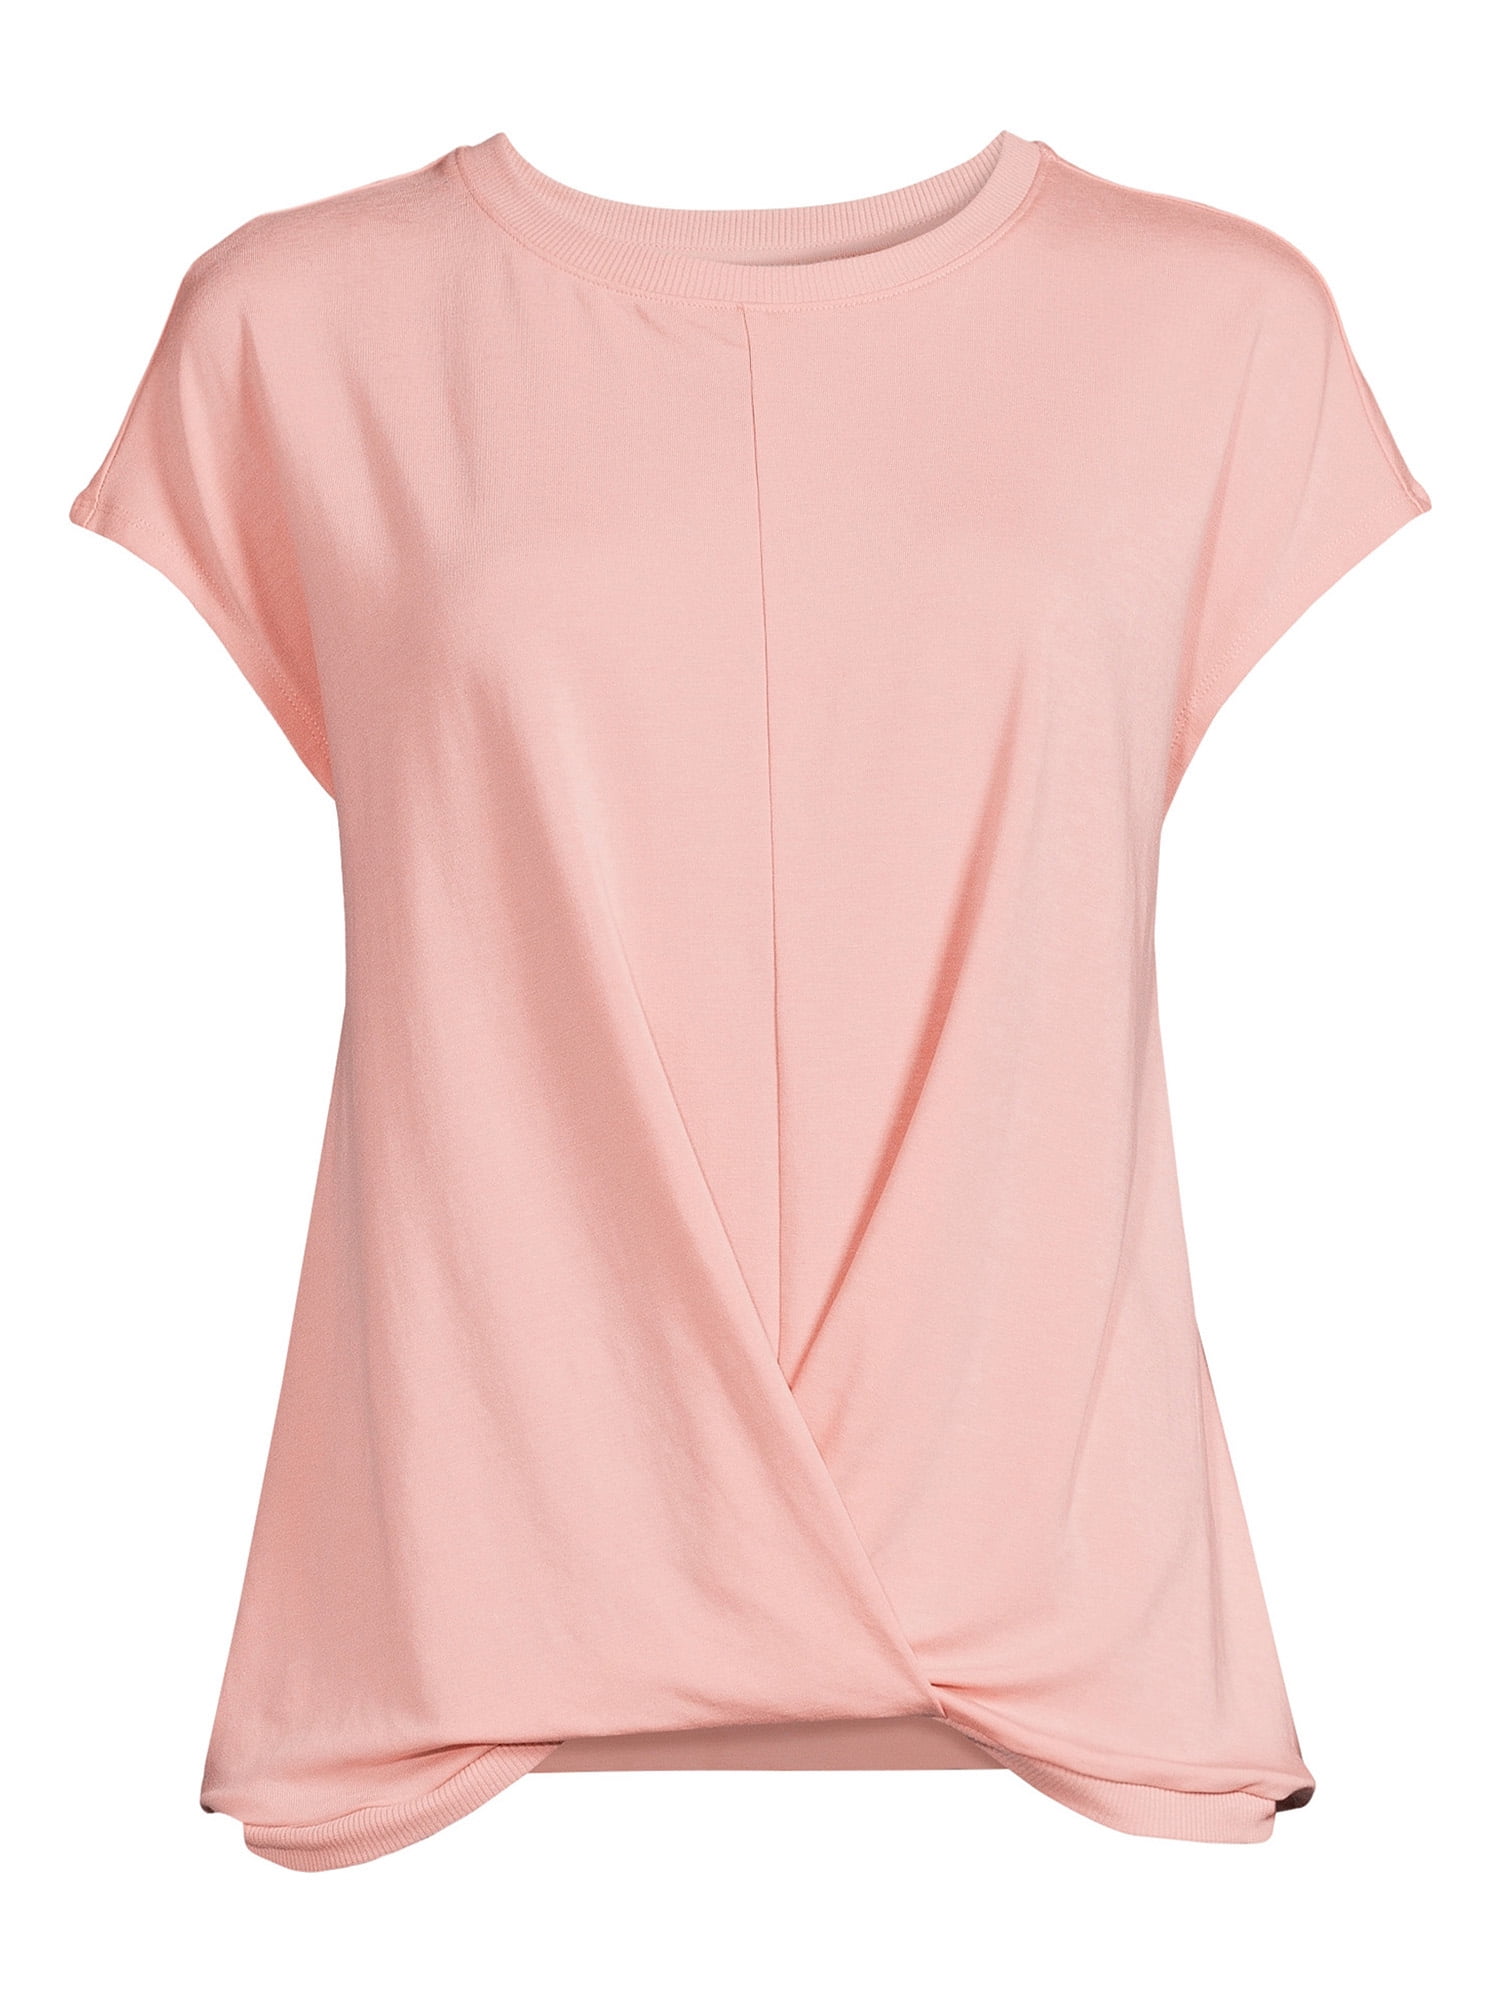 Time And Tru Women's Twist Front Top with Short Sleeves - Walmart.com